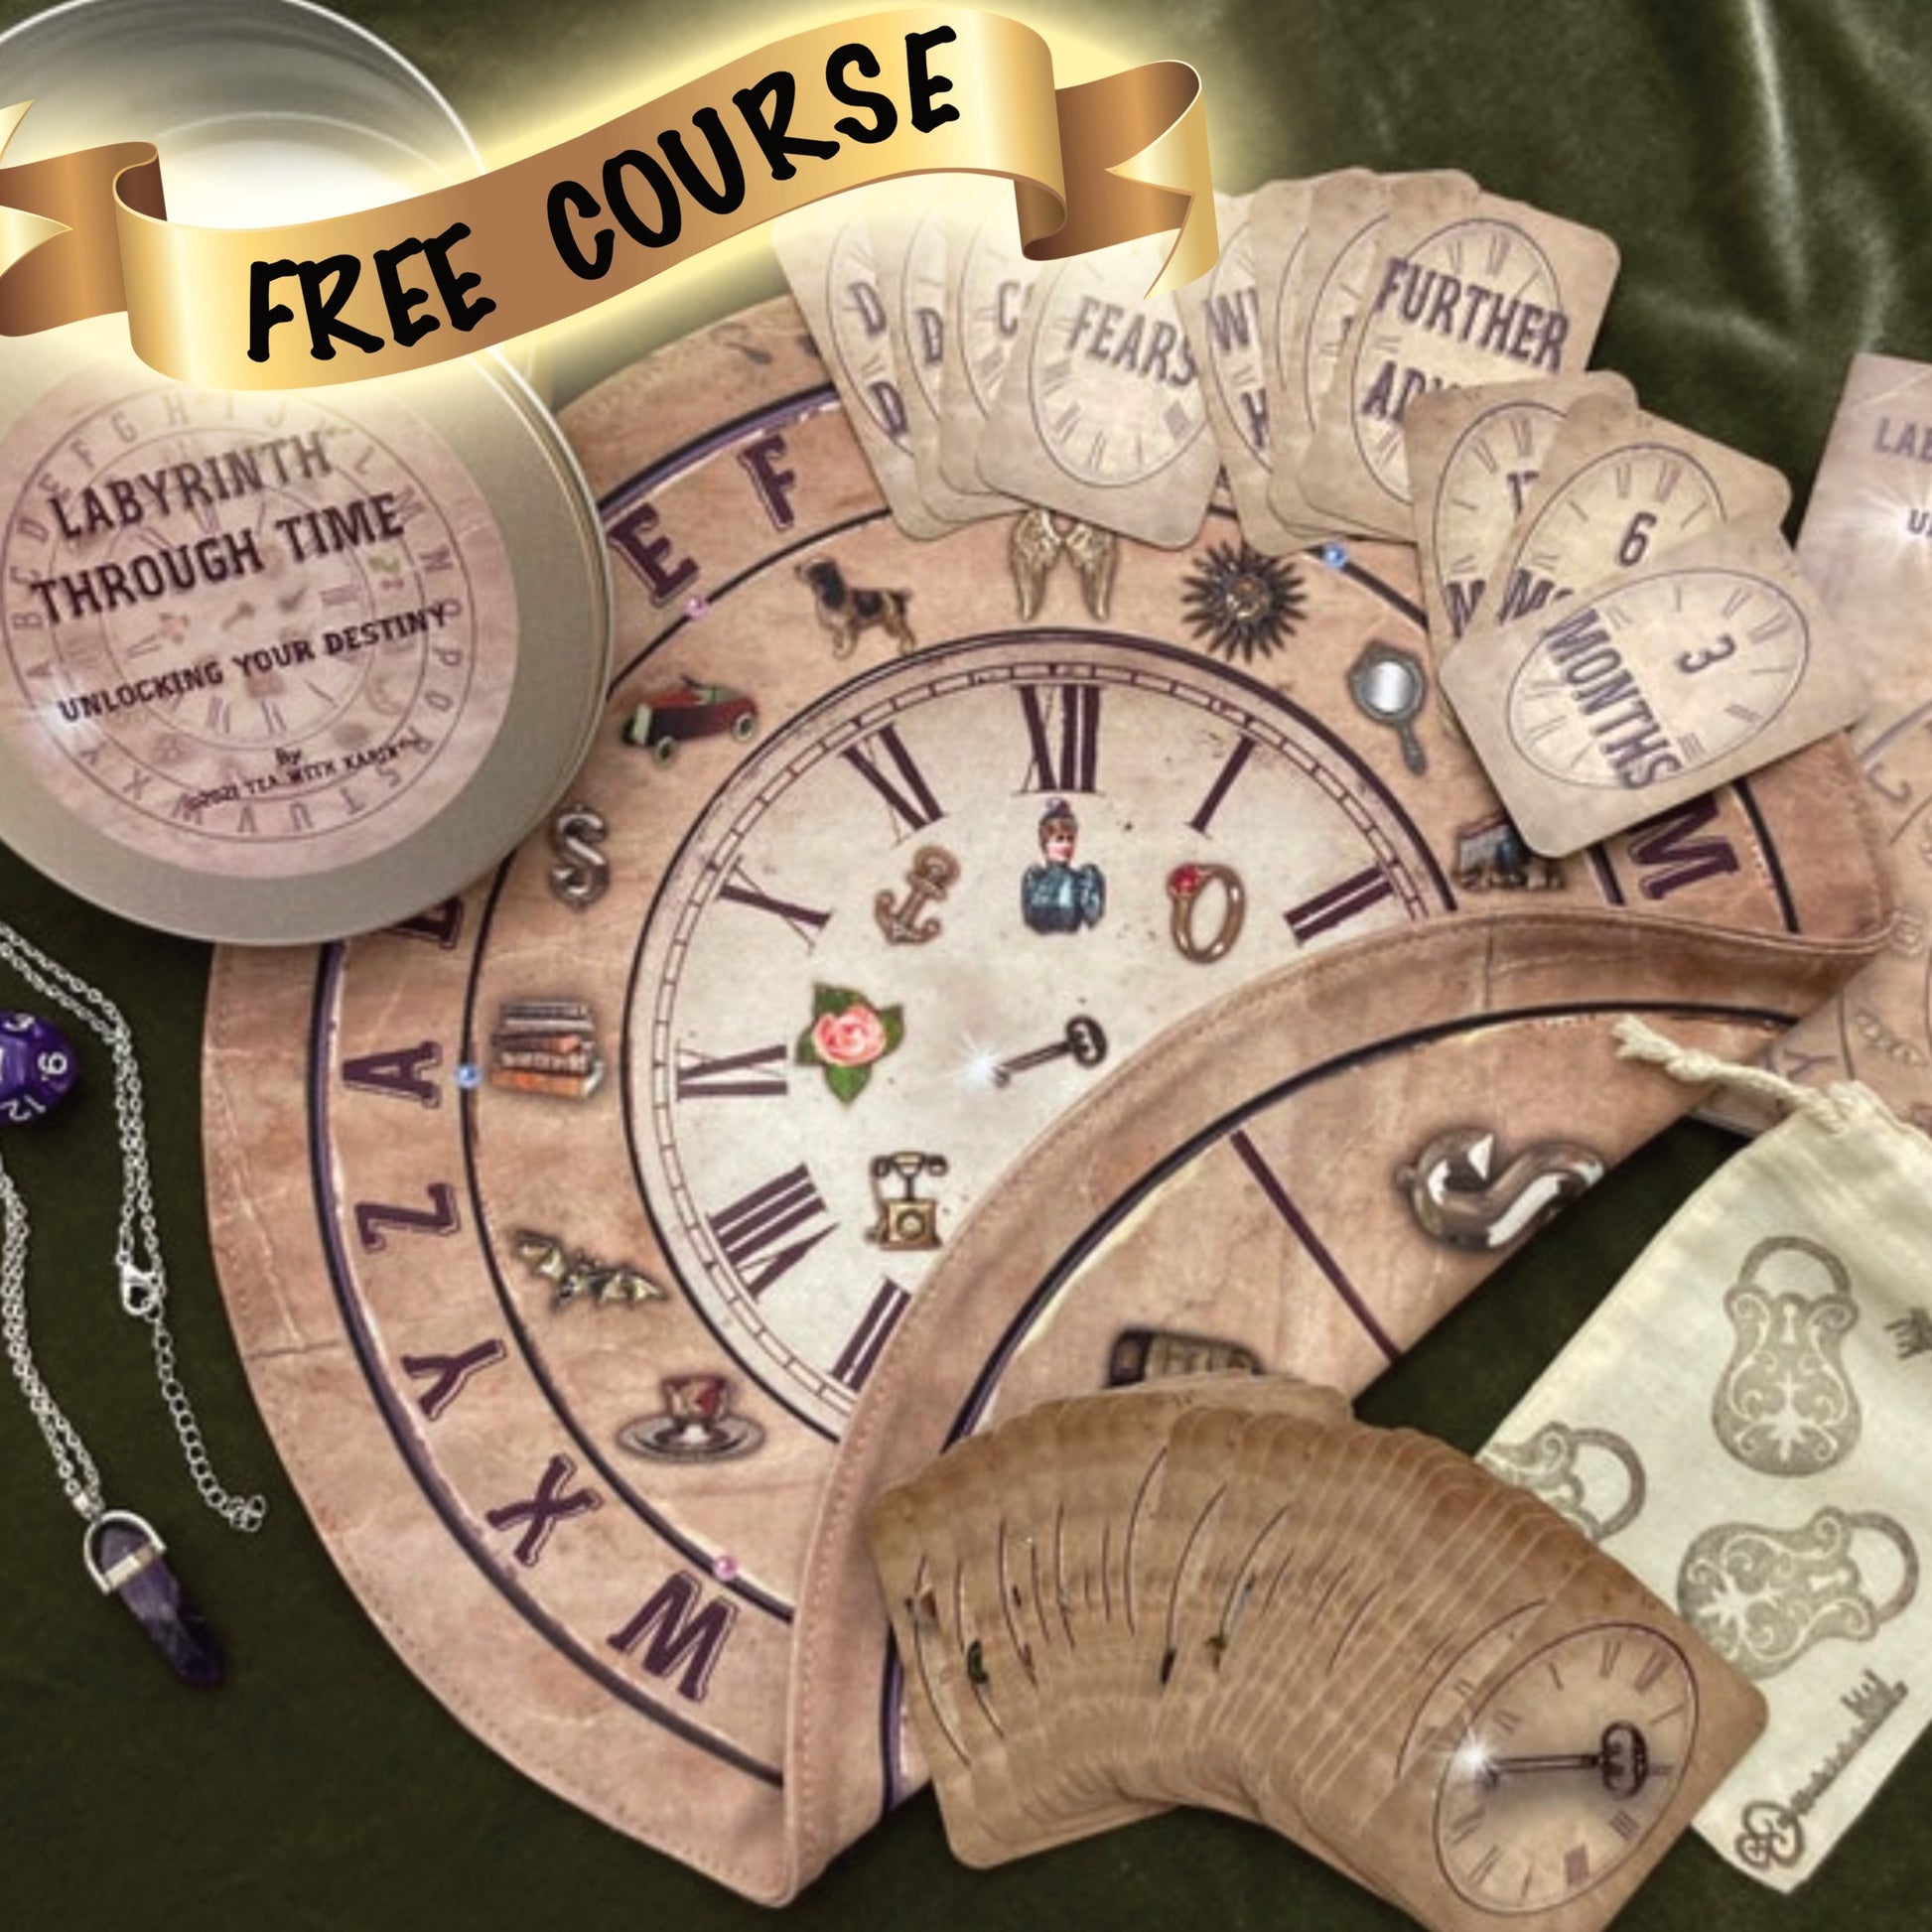 6 Divination tools in one kit. Labyrinth Through Time is a creative idea of Karin dalton-Smith or Tea With Karin in Melbourne, Australia. It is used to connect to loved ones in spirit, mediumship as well as look in the fortune. Great gift idea